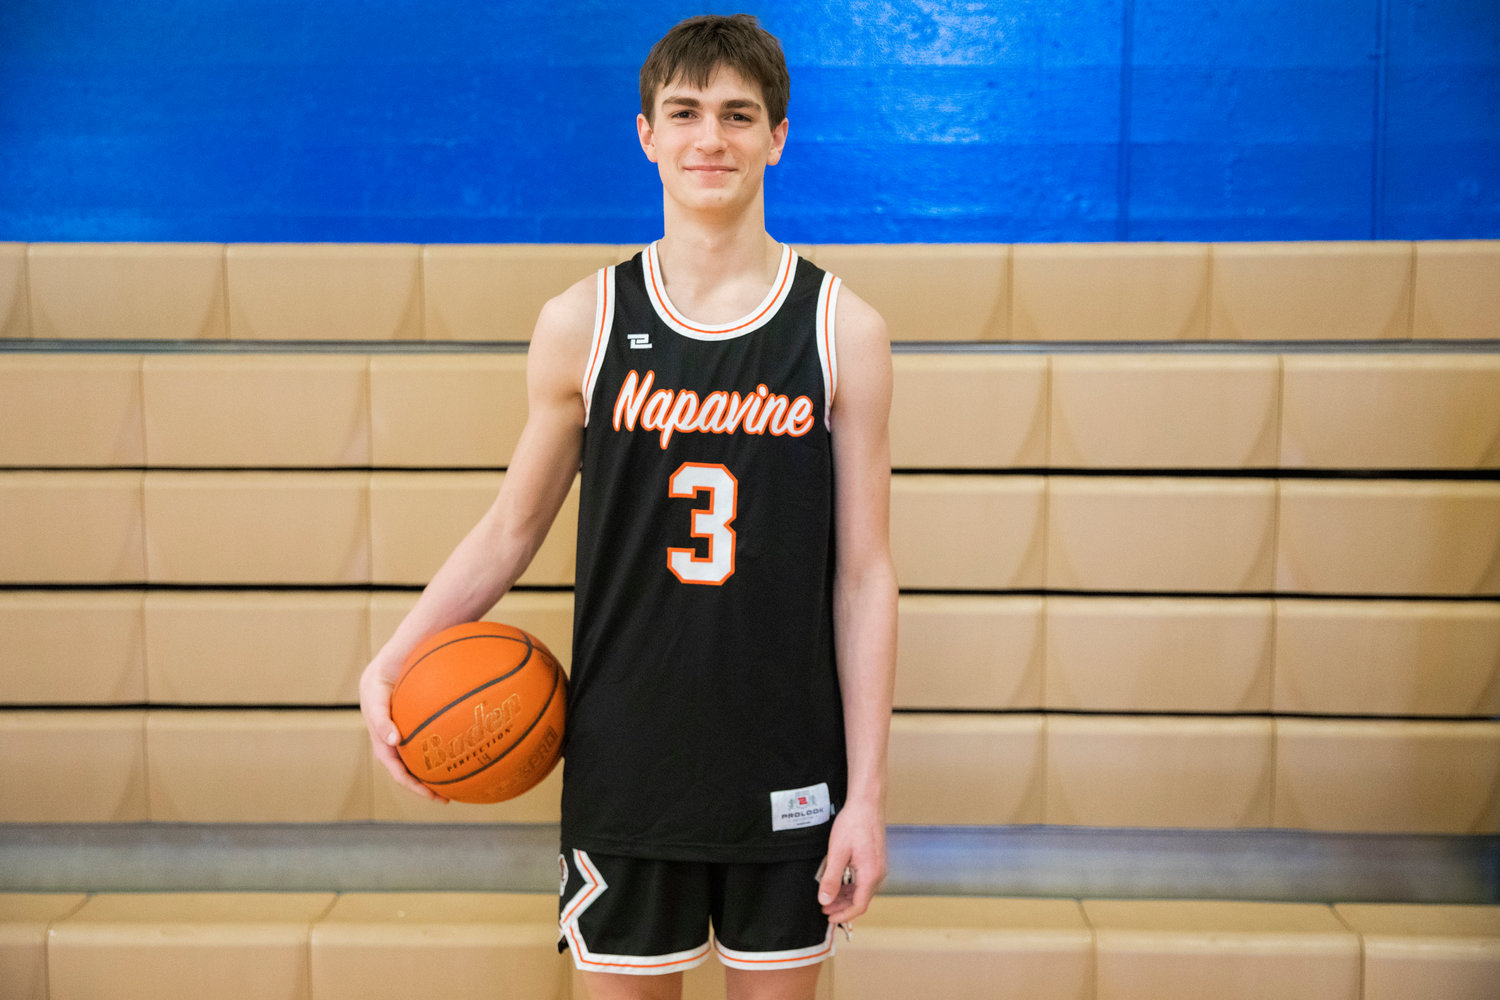 Napavine junior James Grose smiles for a photo after being named the all-area MVP in Centralia on Tuesday.